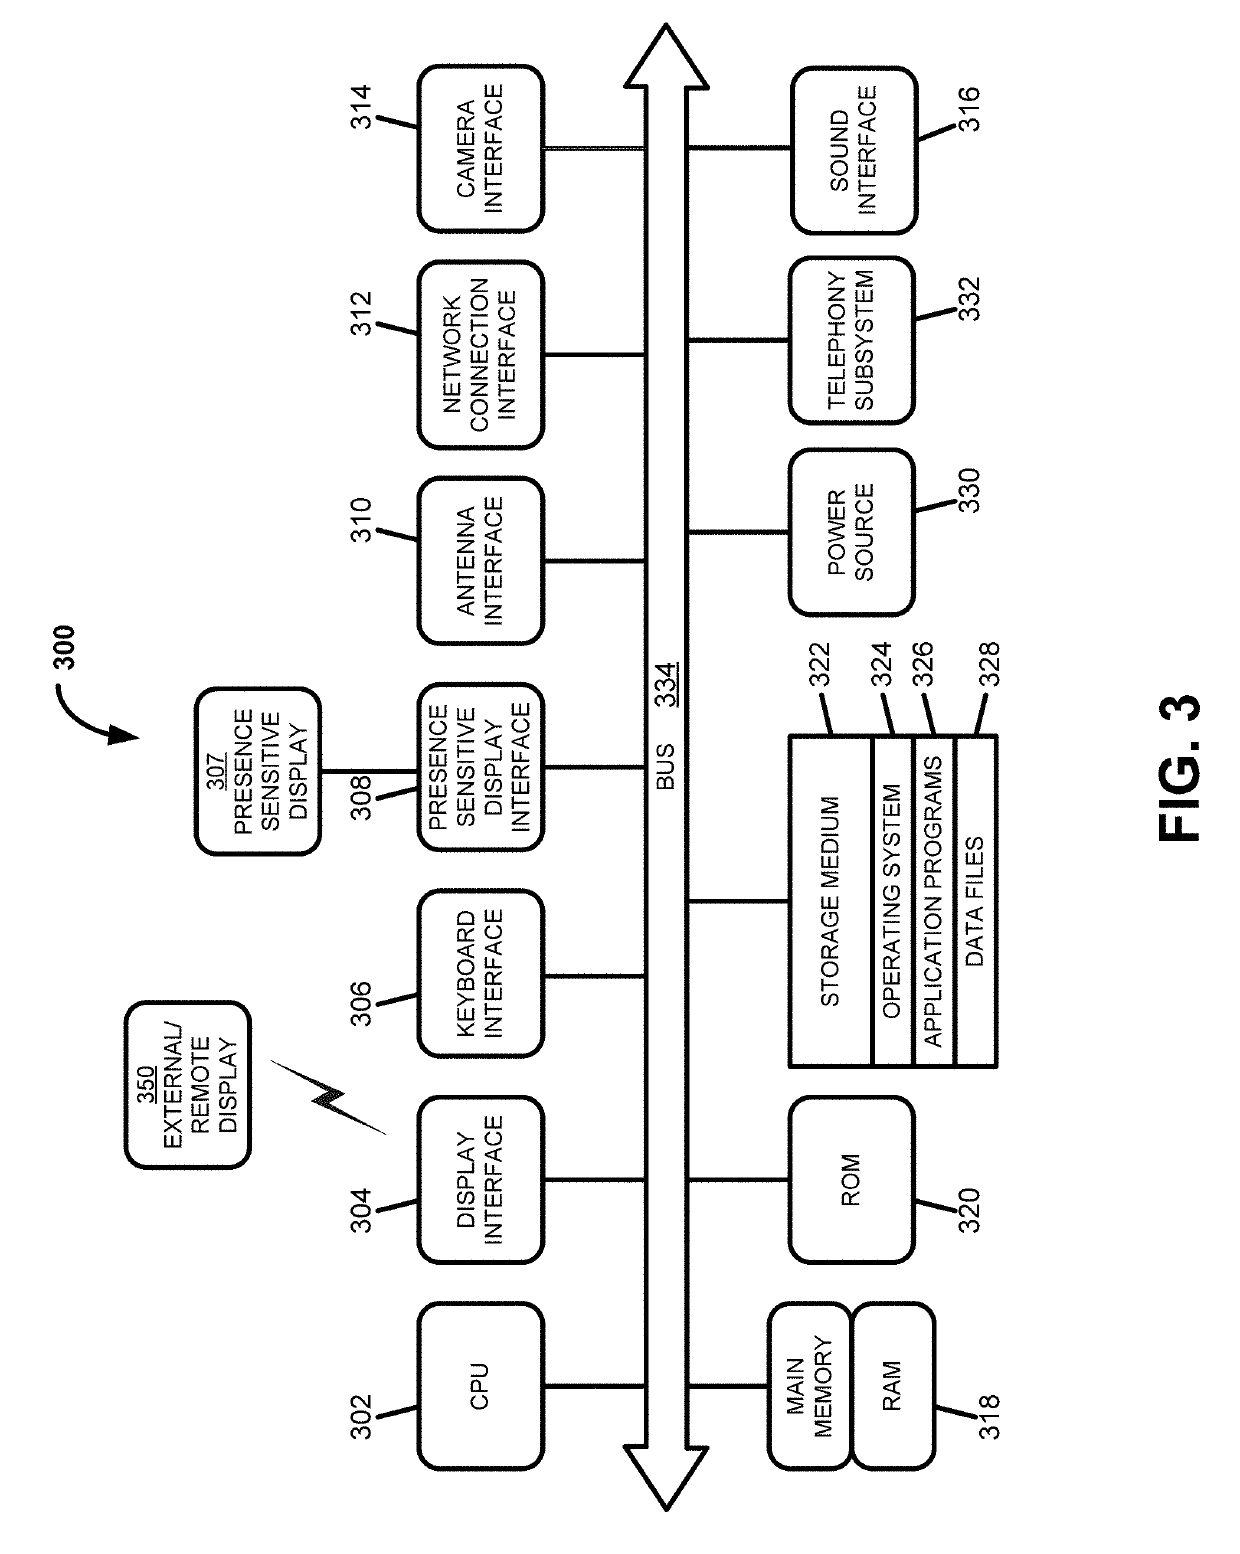 Systems and Methods for Use of Distributed Ledger Technology for Recording and Utilizing Credit Account Transaction Information